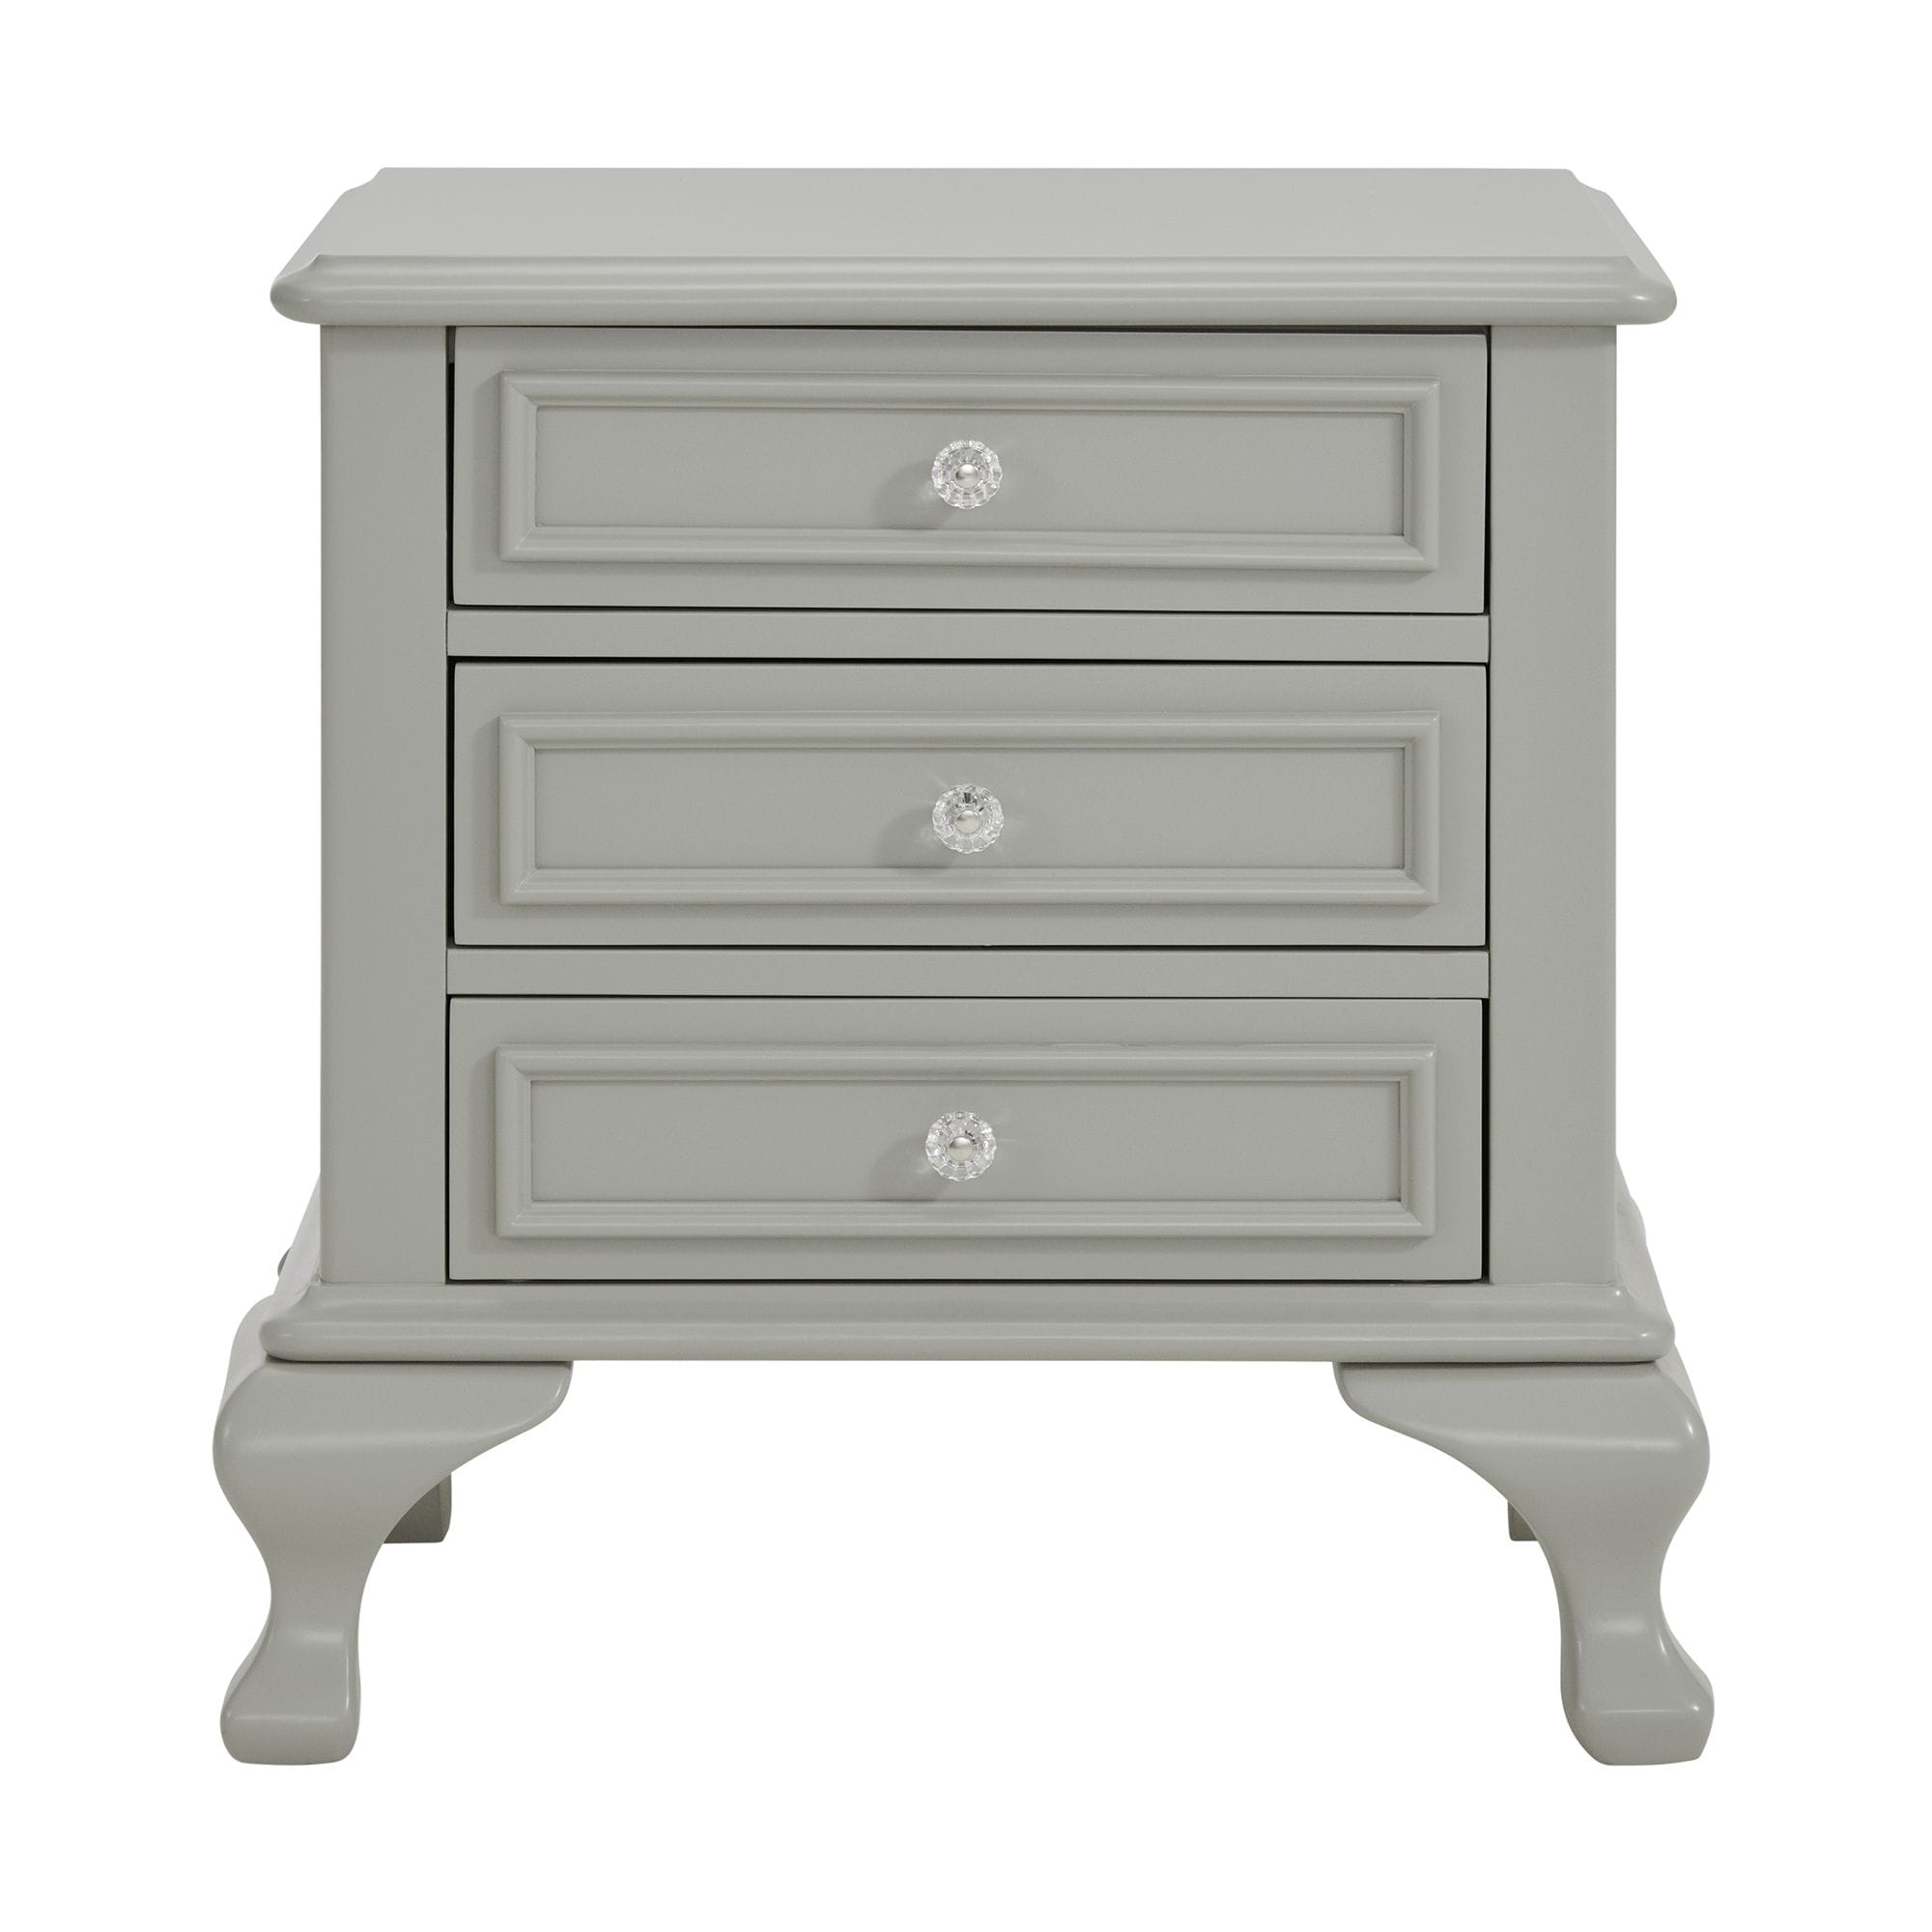 Jenna Nightstands at Lowes.com